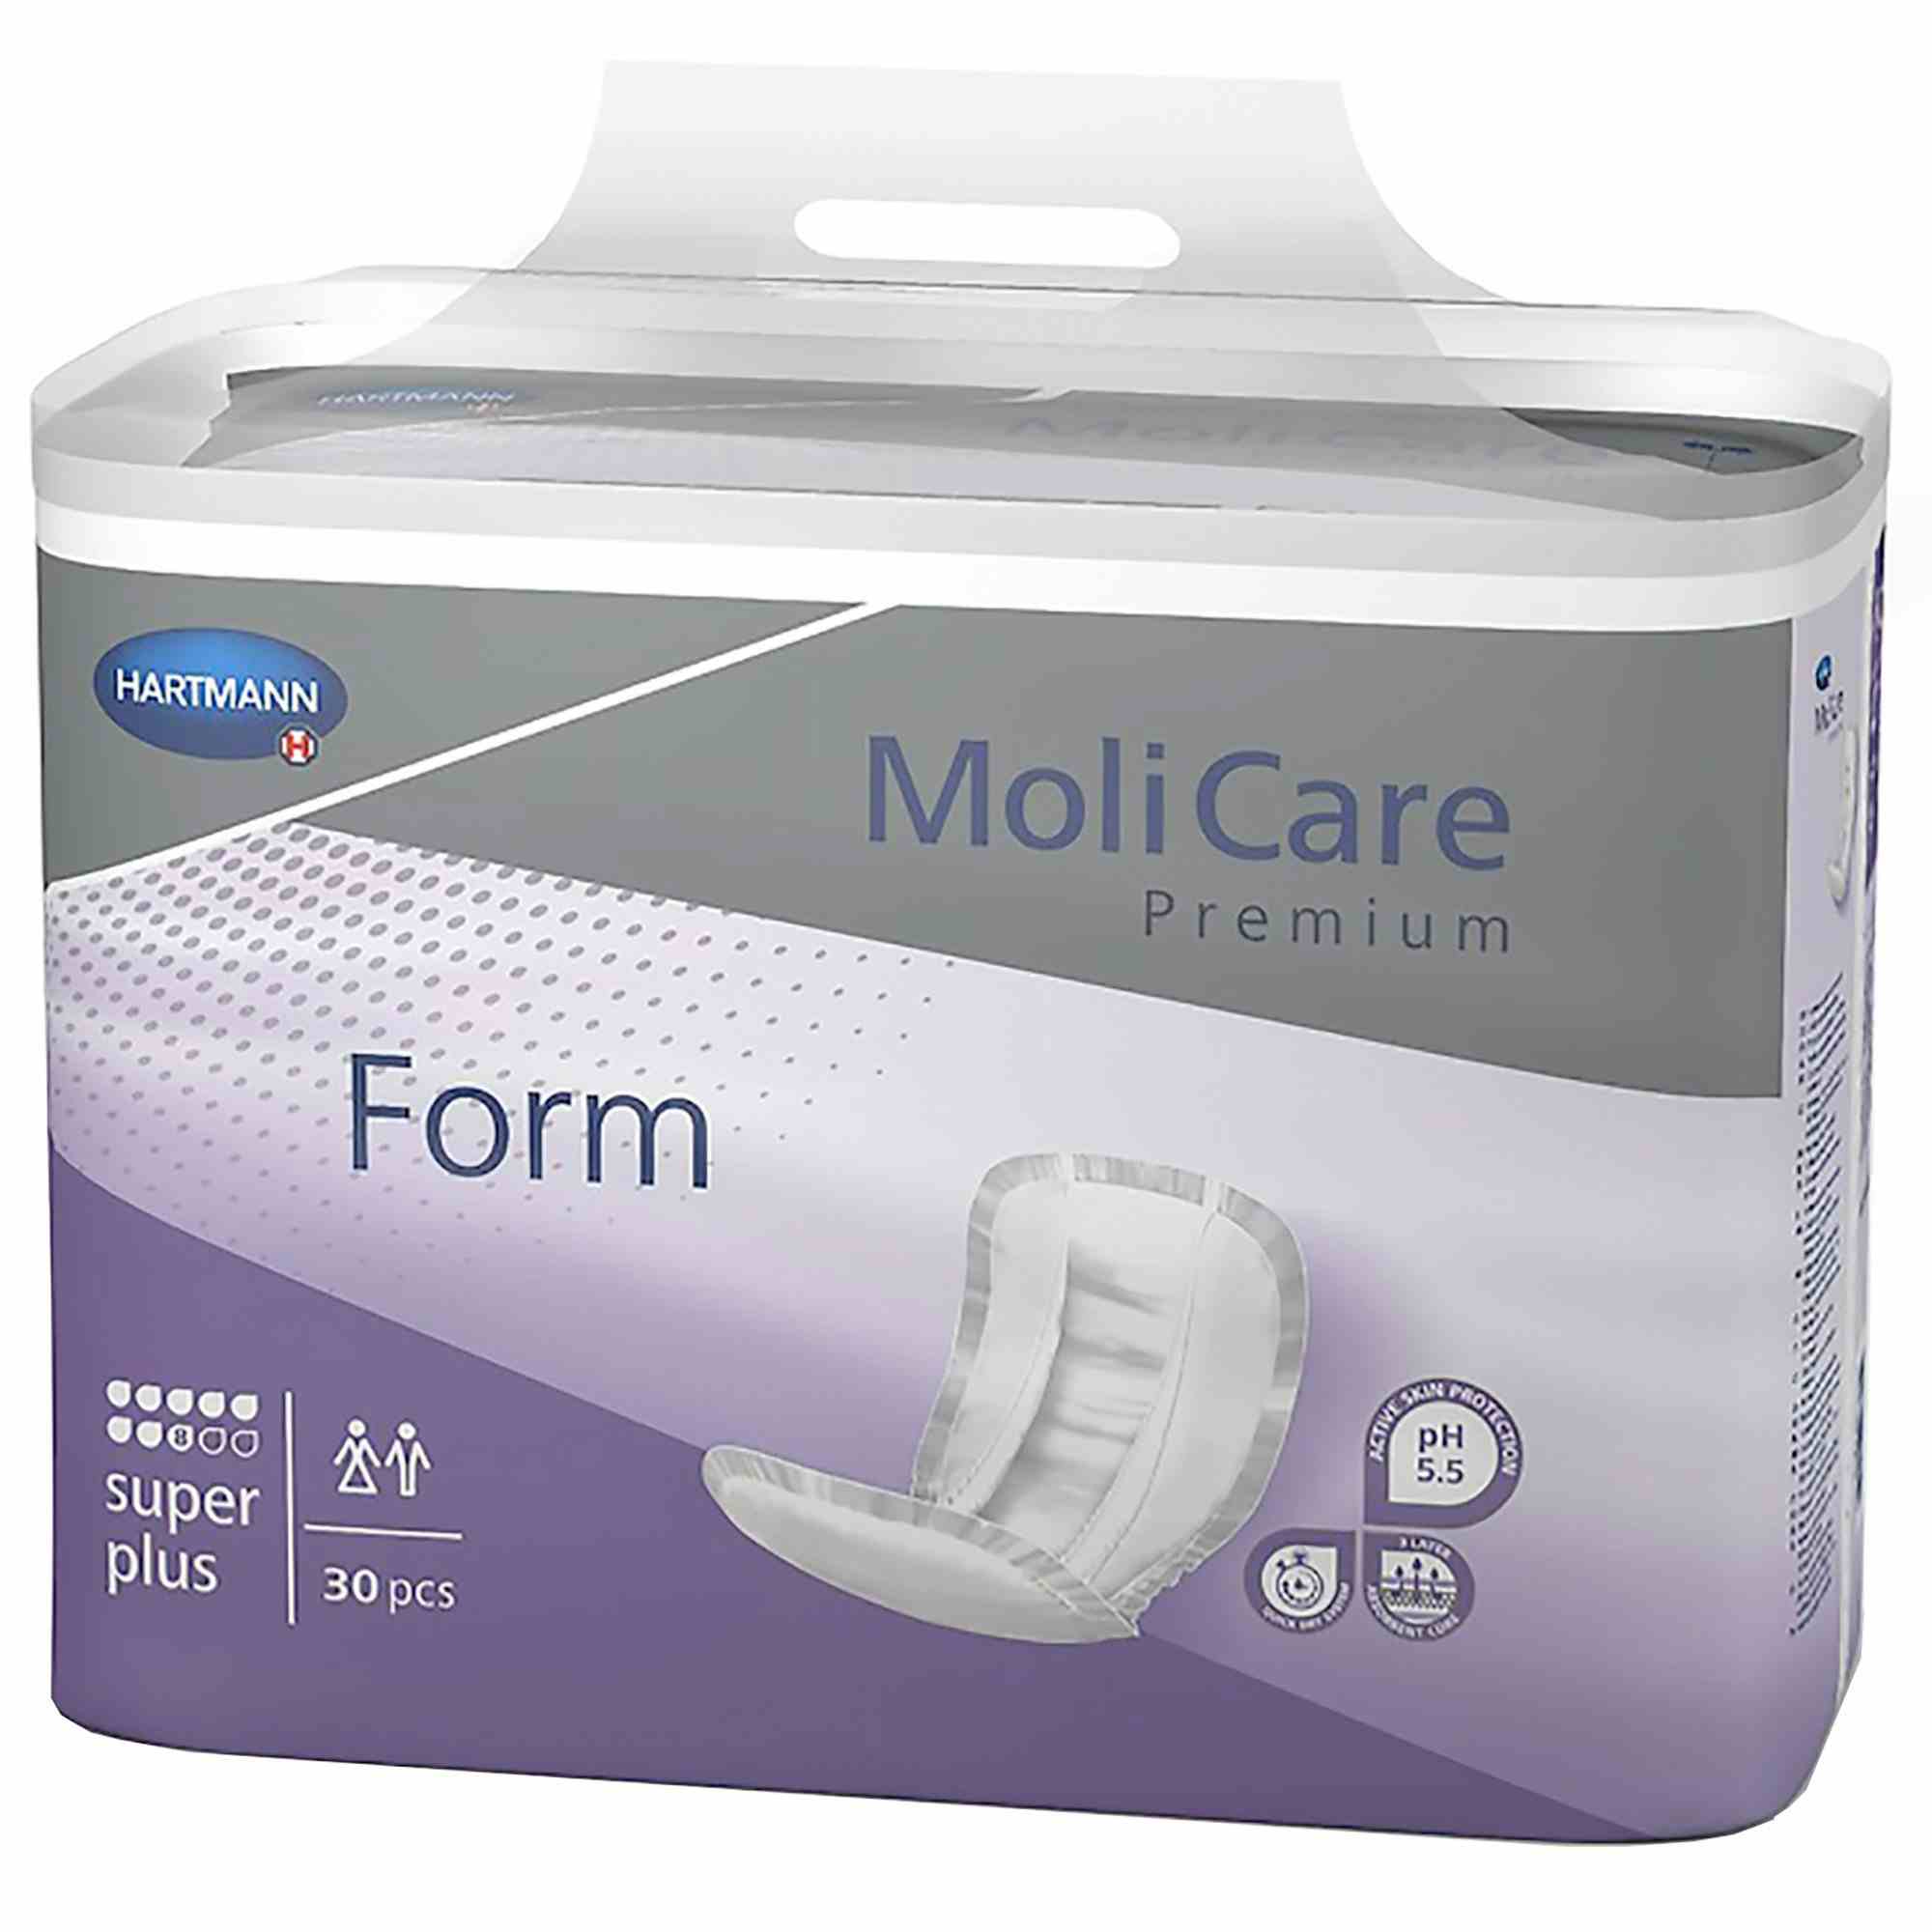 MoliCare Premium Form Super Plus Adult Disposable Bladder Control Pad, Heavy, 168919, One Size Fits Most - Case of 120